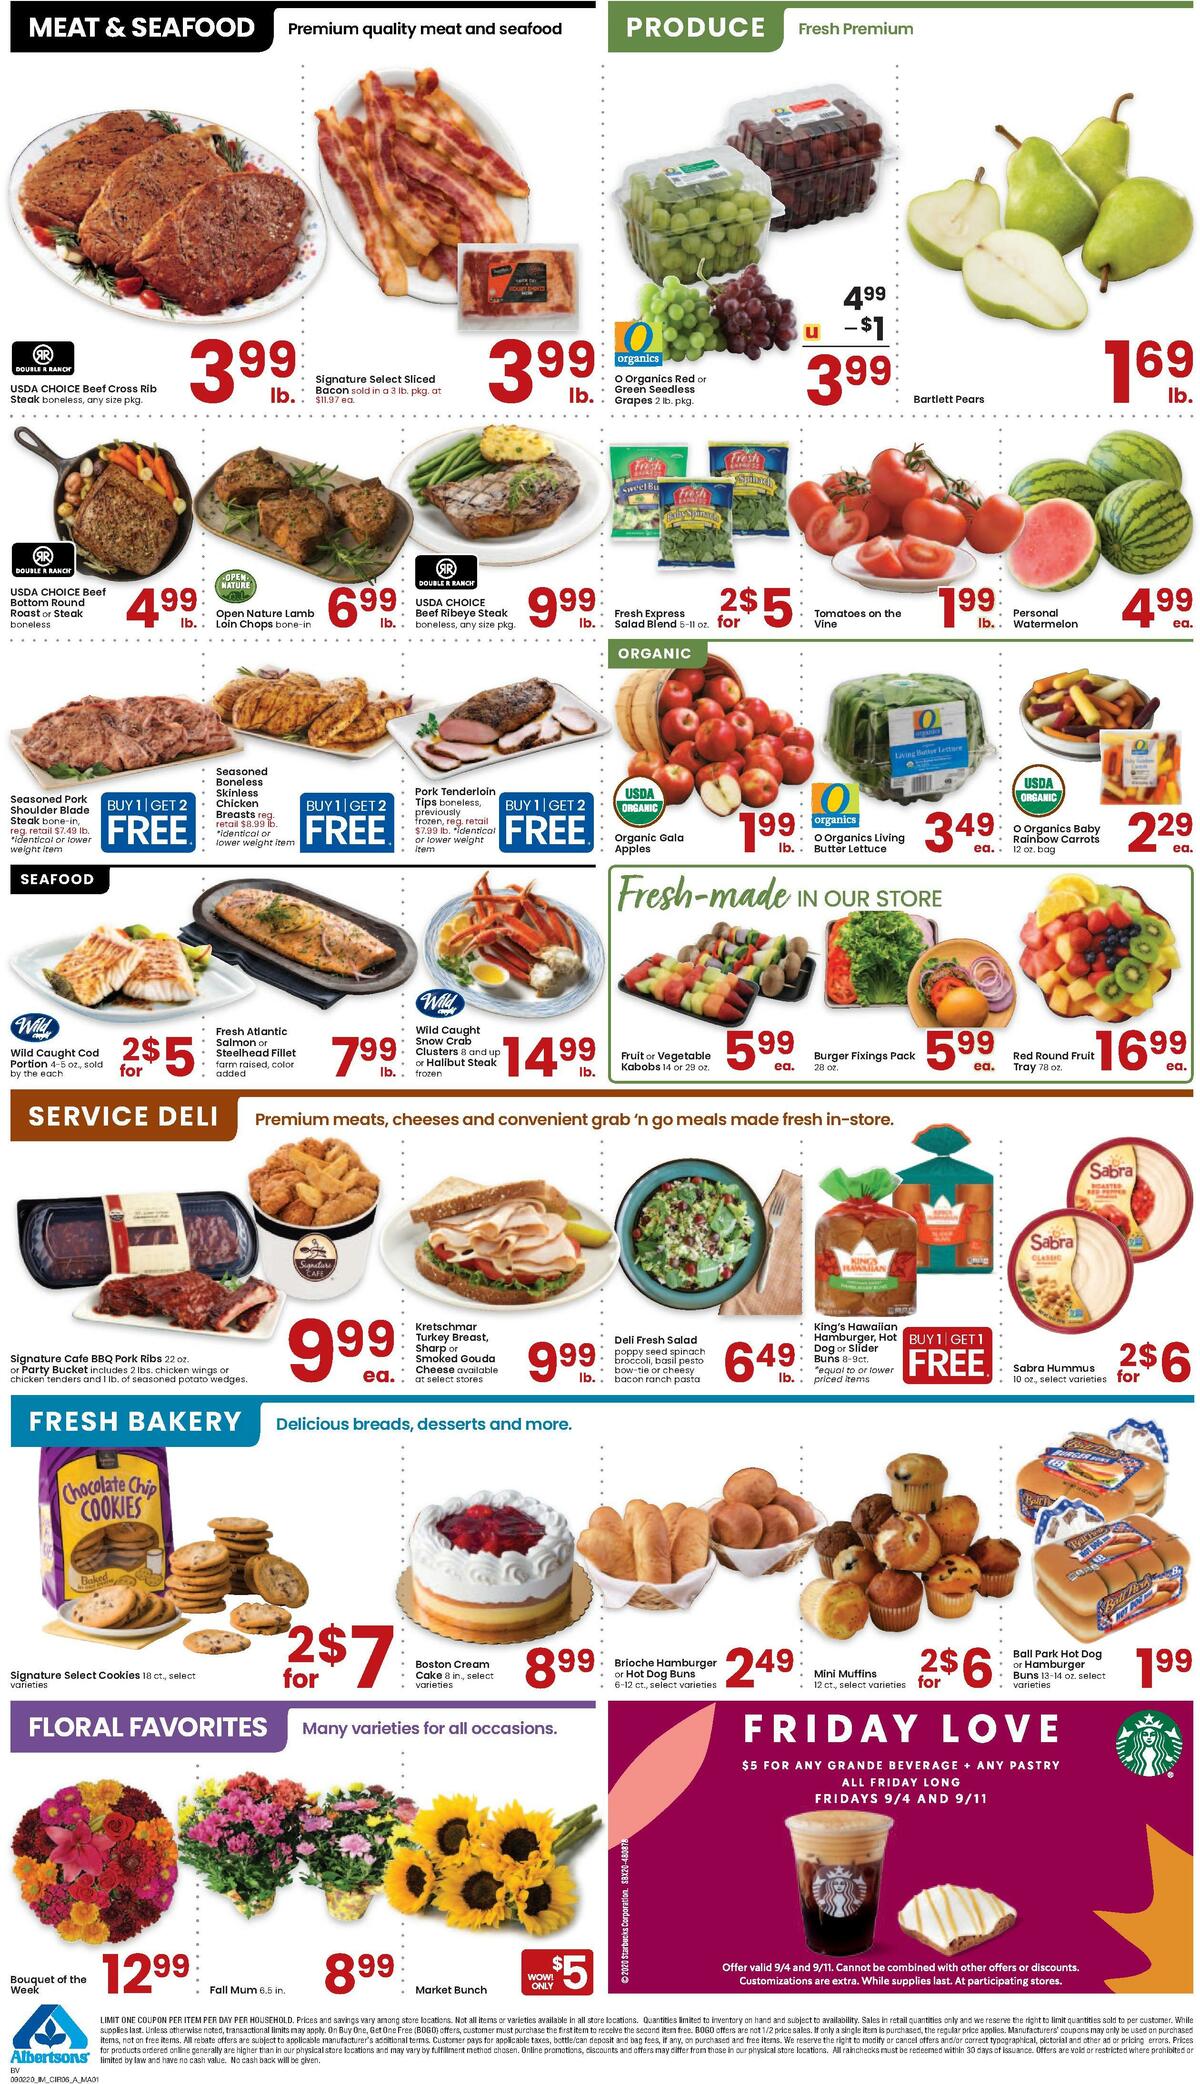 Albertsons Weekly Ad from September 2